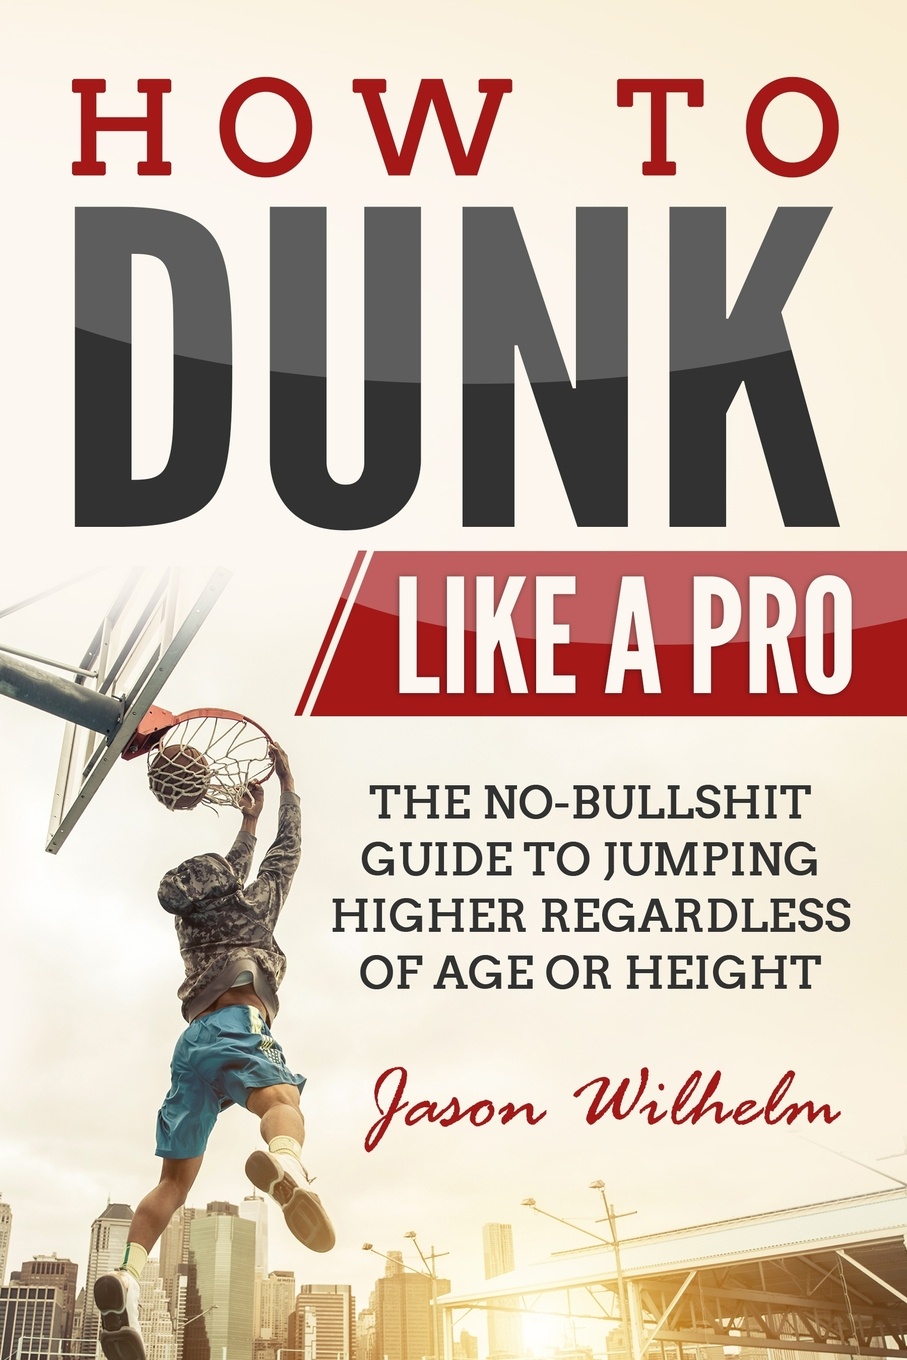 How to Dunk Like a Pro. The No-Bullshit Guide to Jumping Higher Regardless of Age or Height